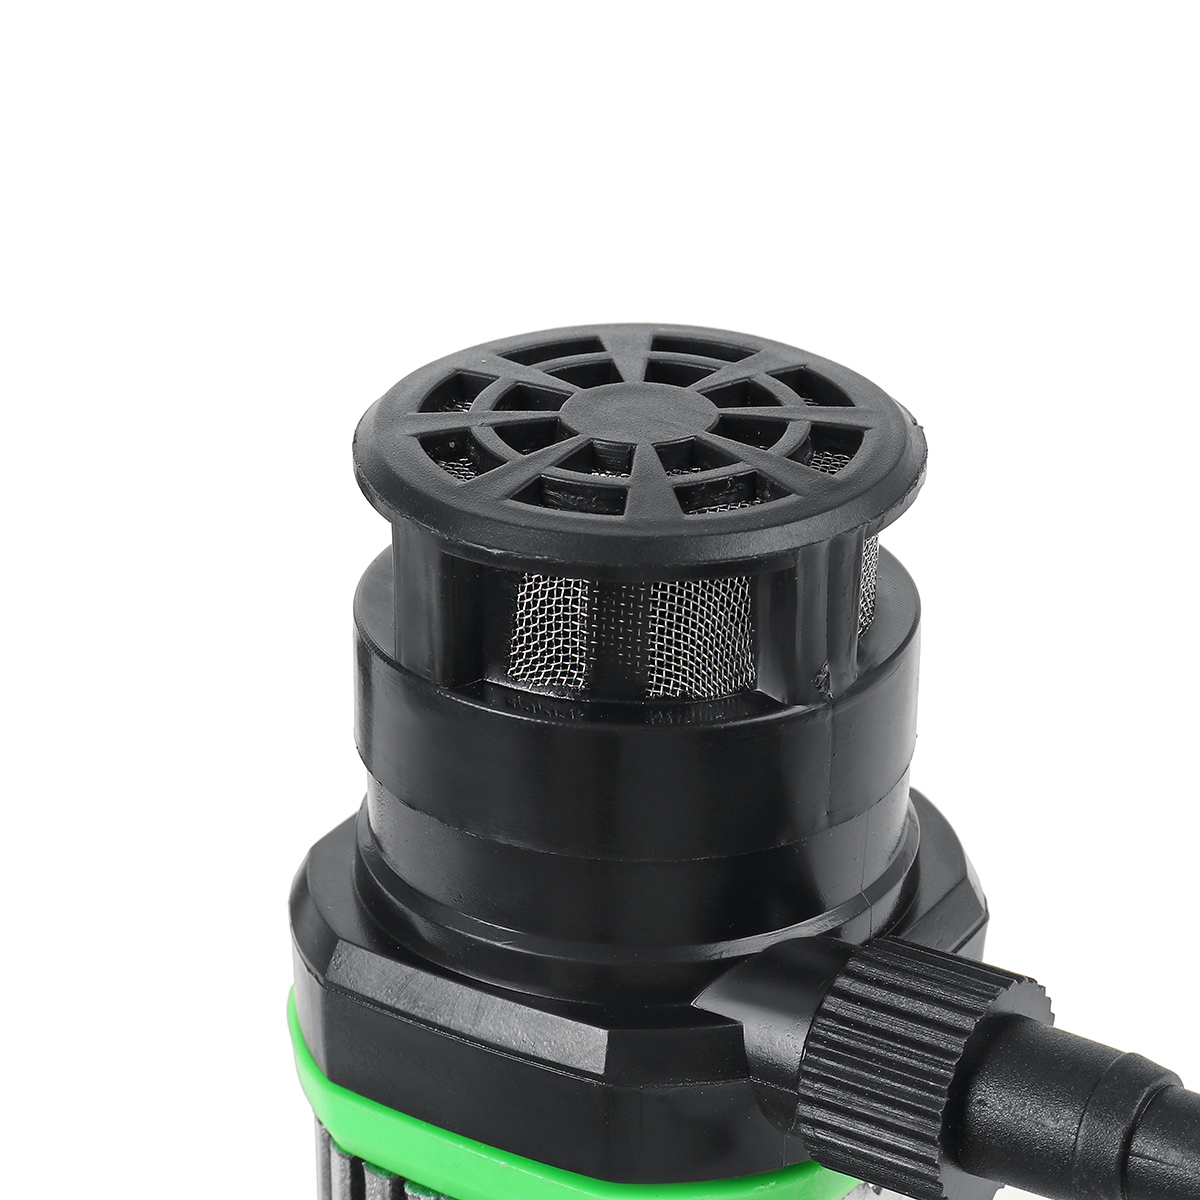 Find 12V 6/8/10mm Small Water Pump Household for Water Drill Cutting Machine Fish Tank Pump for Sale on Gipsybee.com with cryptocurrencies